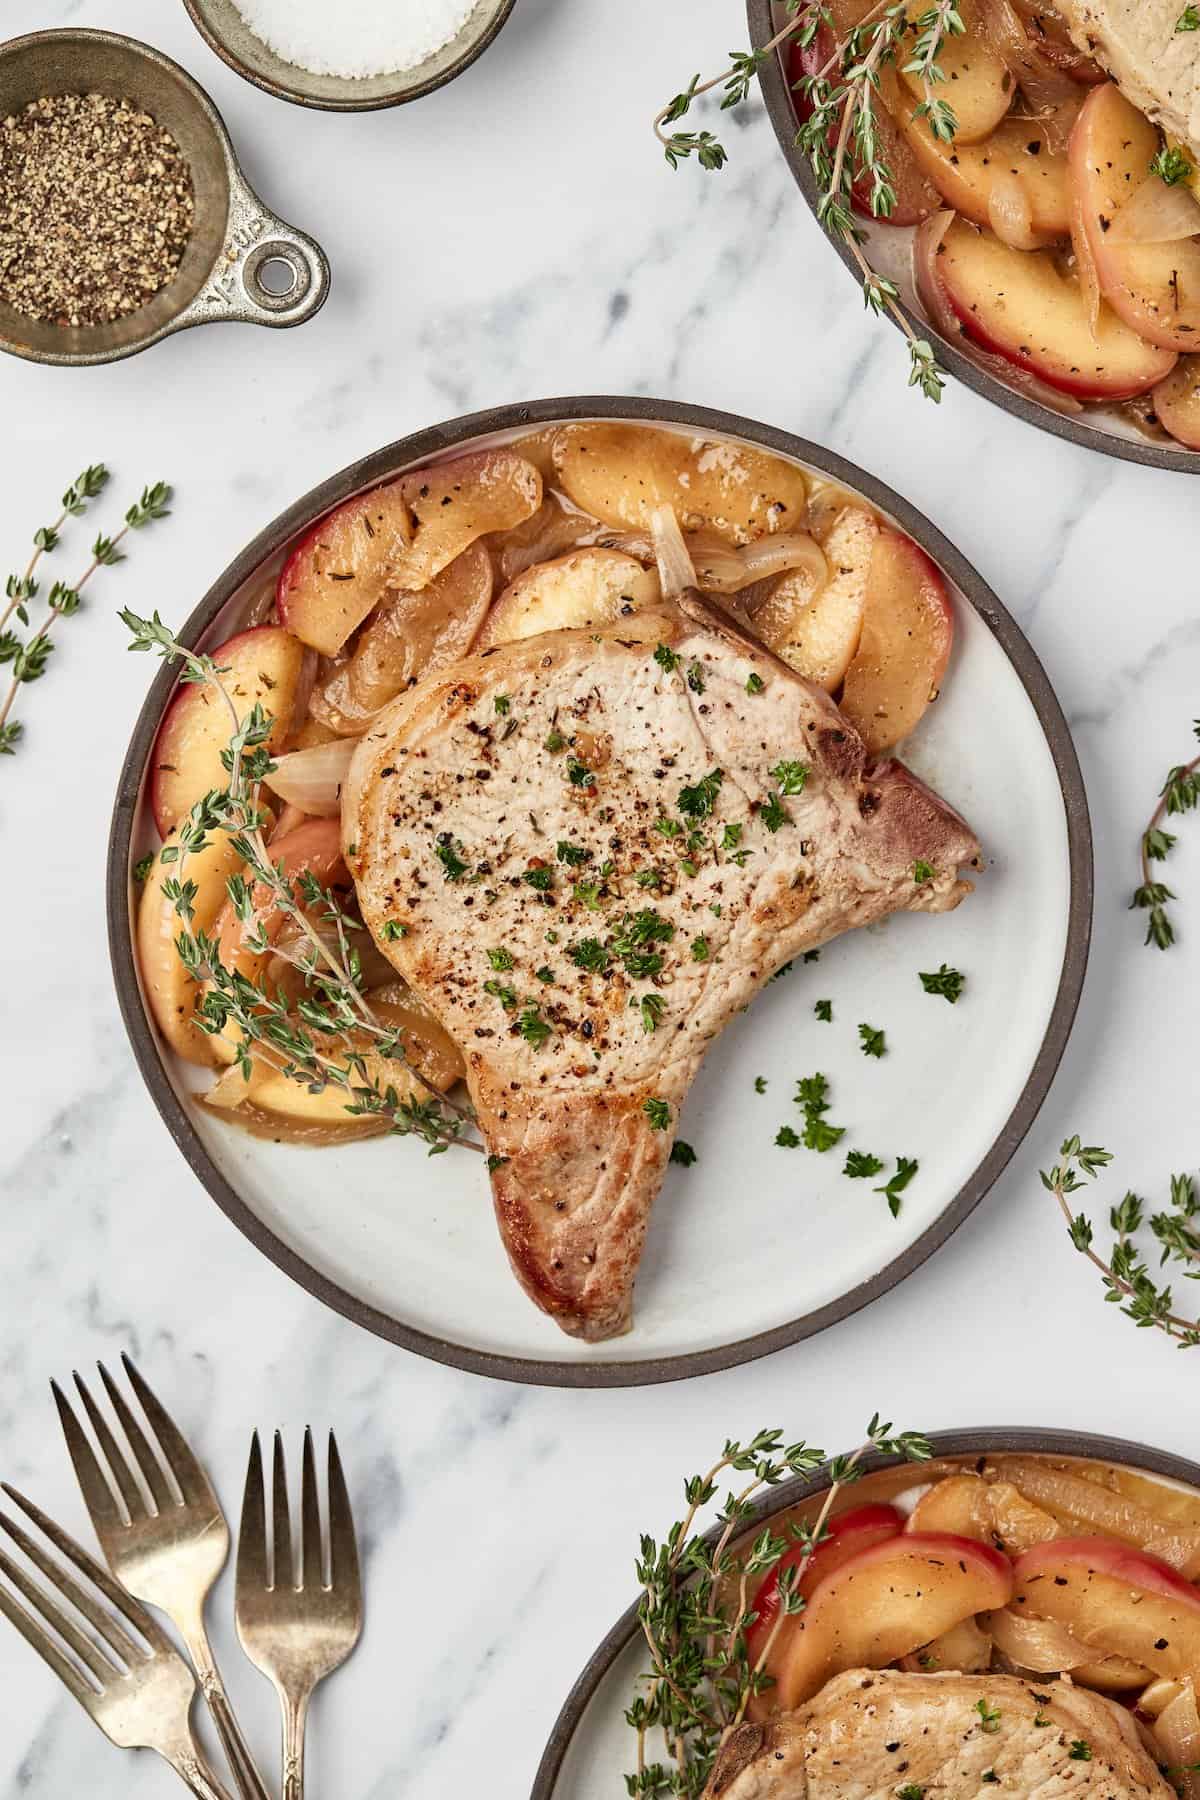 Overhead view of pork chops with apples and onions on plate